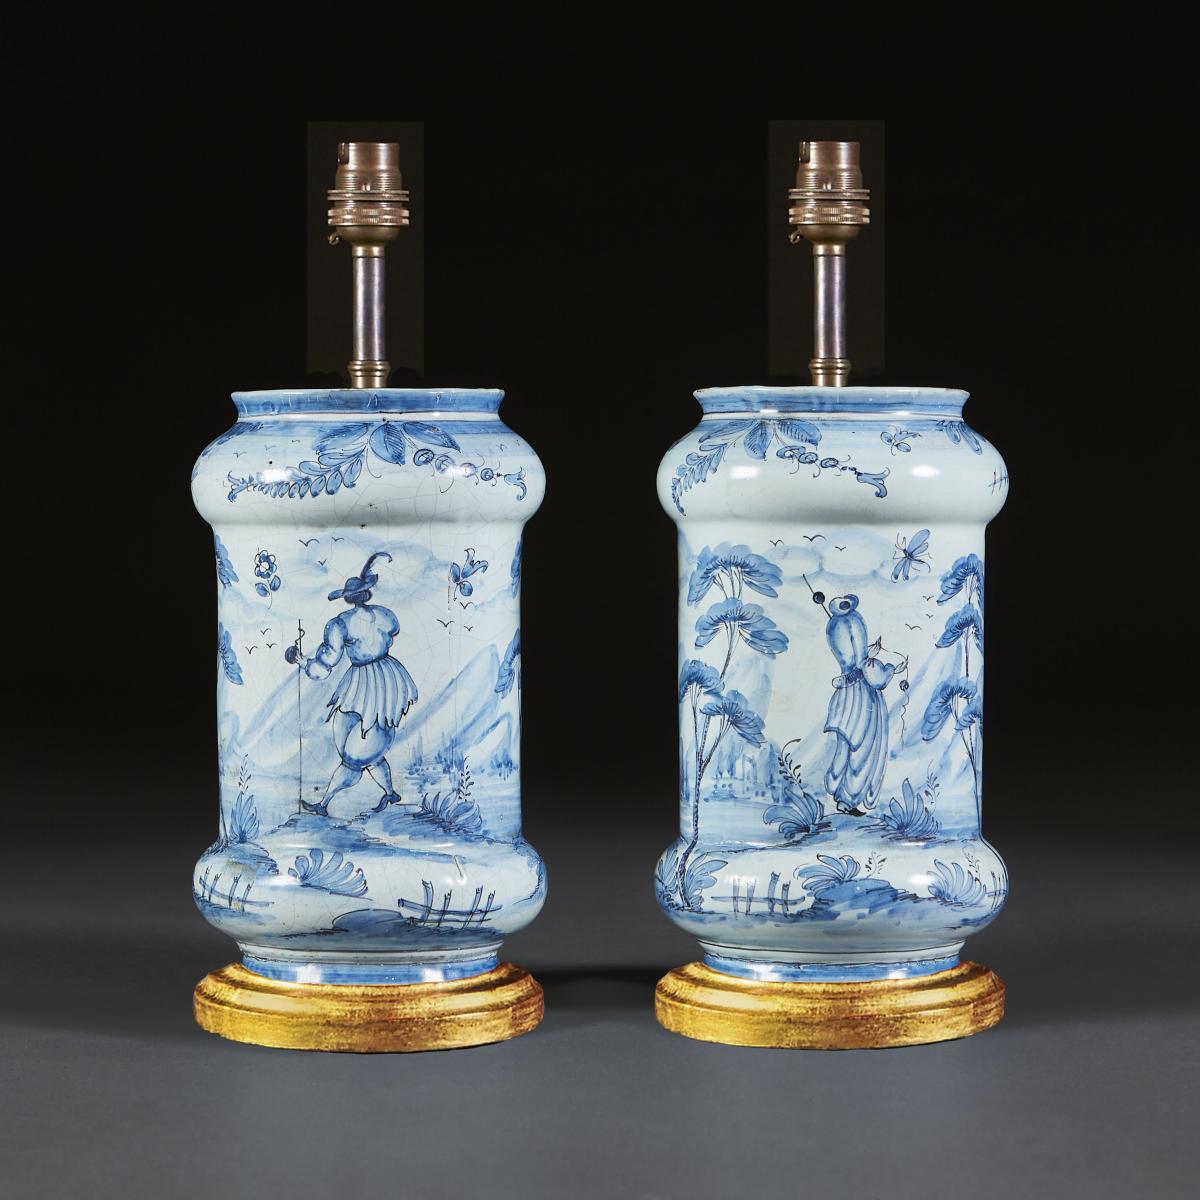 A Pair of Blue and White Italian Tin Glaze Vases as Lamps